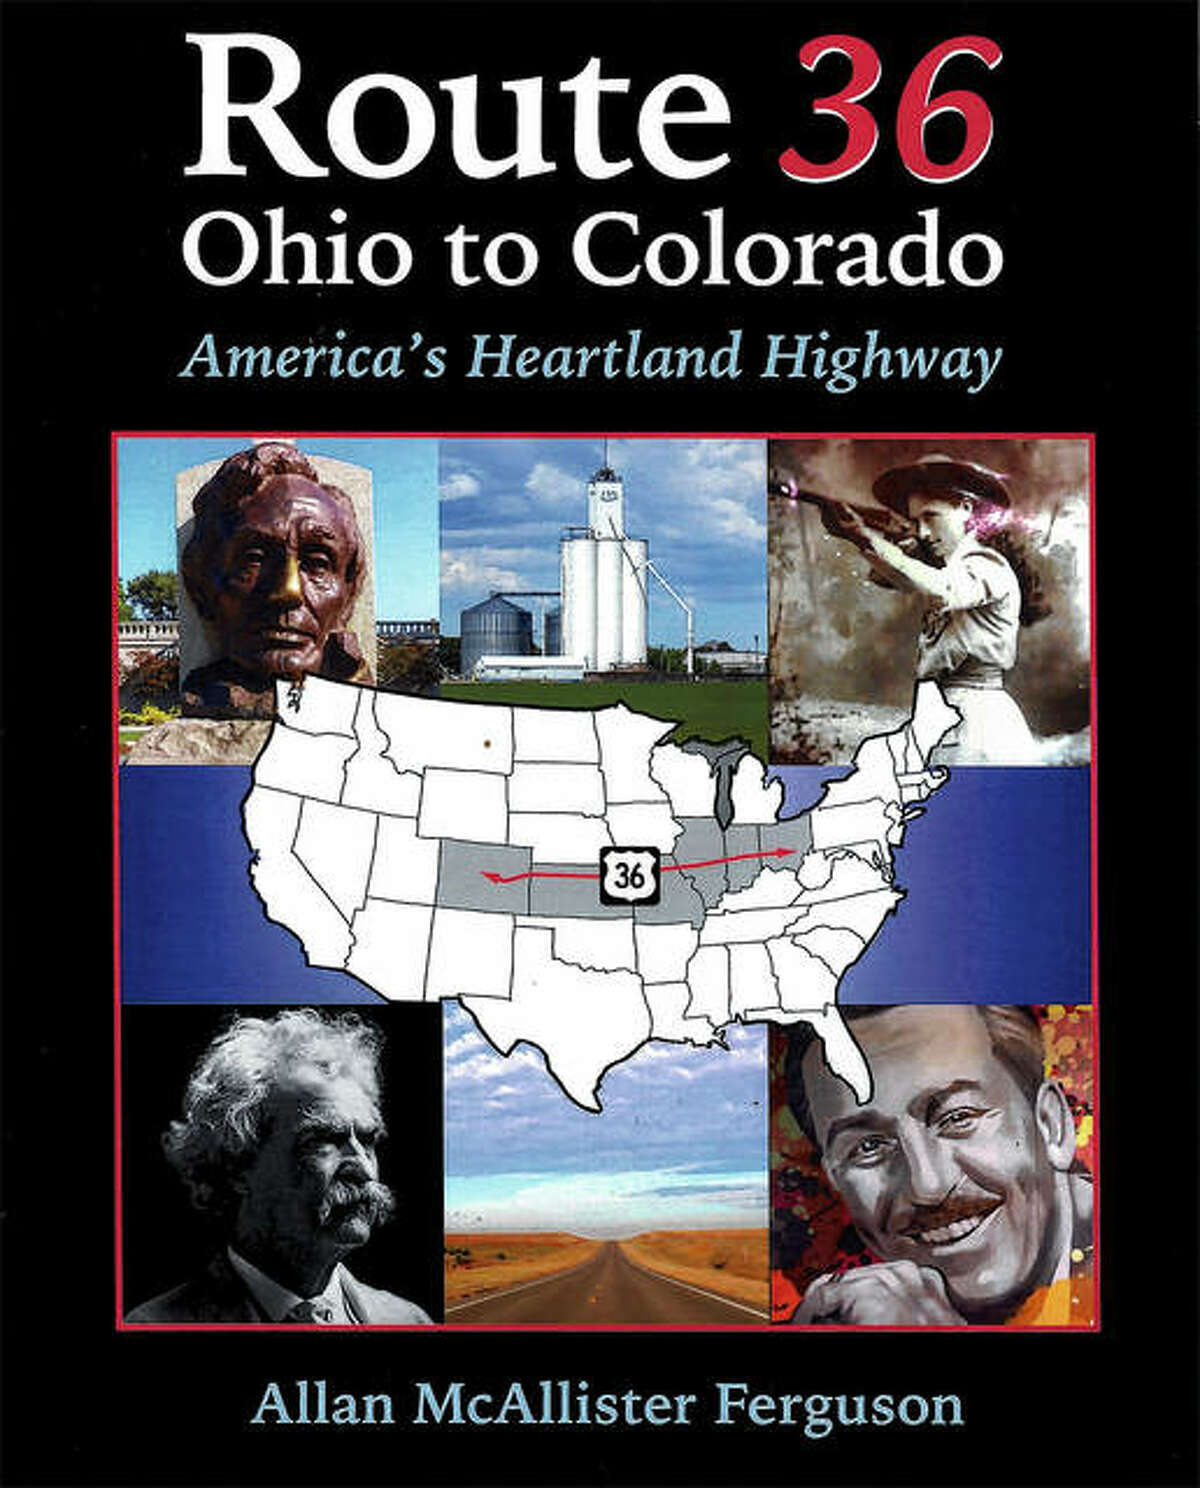 Allan Ferguson’s latest book explores Route 36 and the communities through which it runs from Ohio to Colorado.